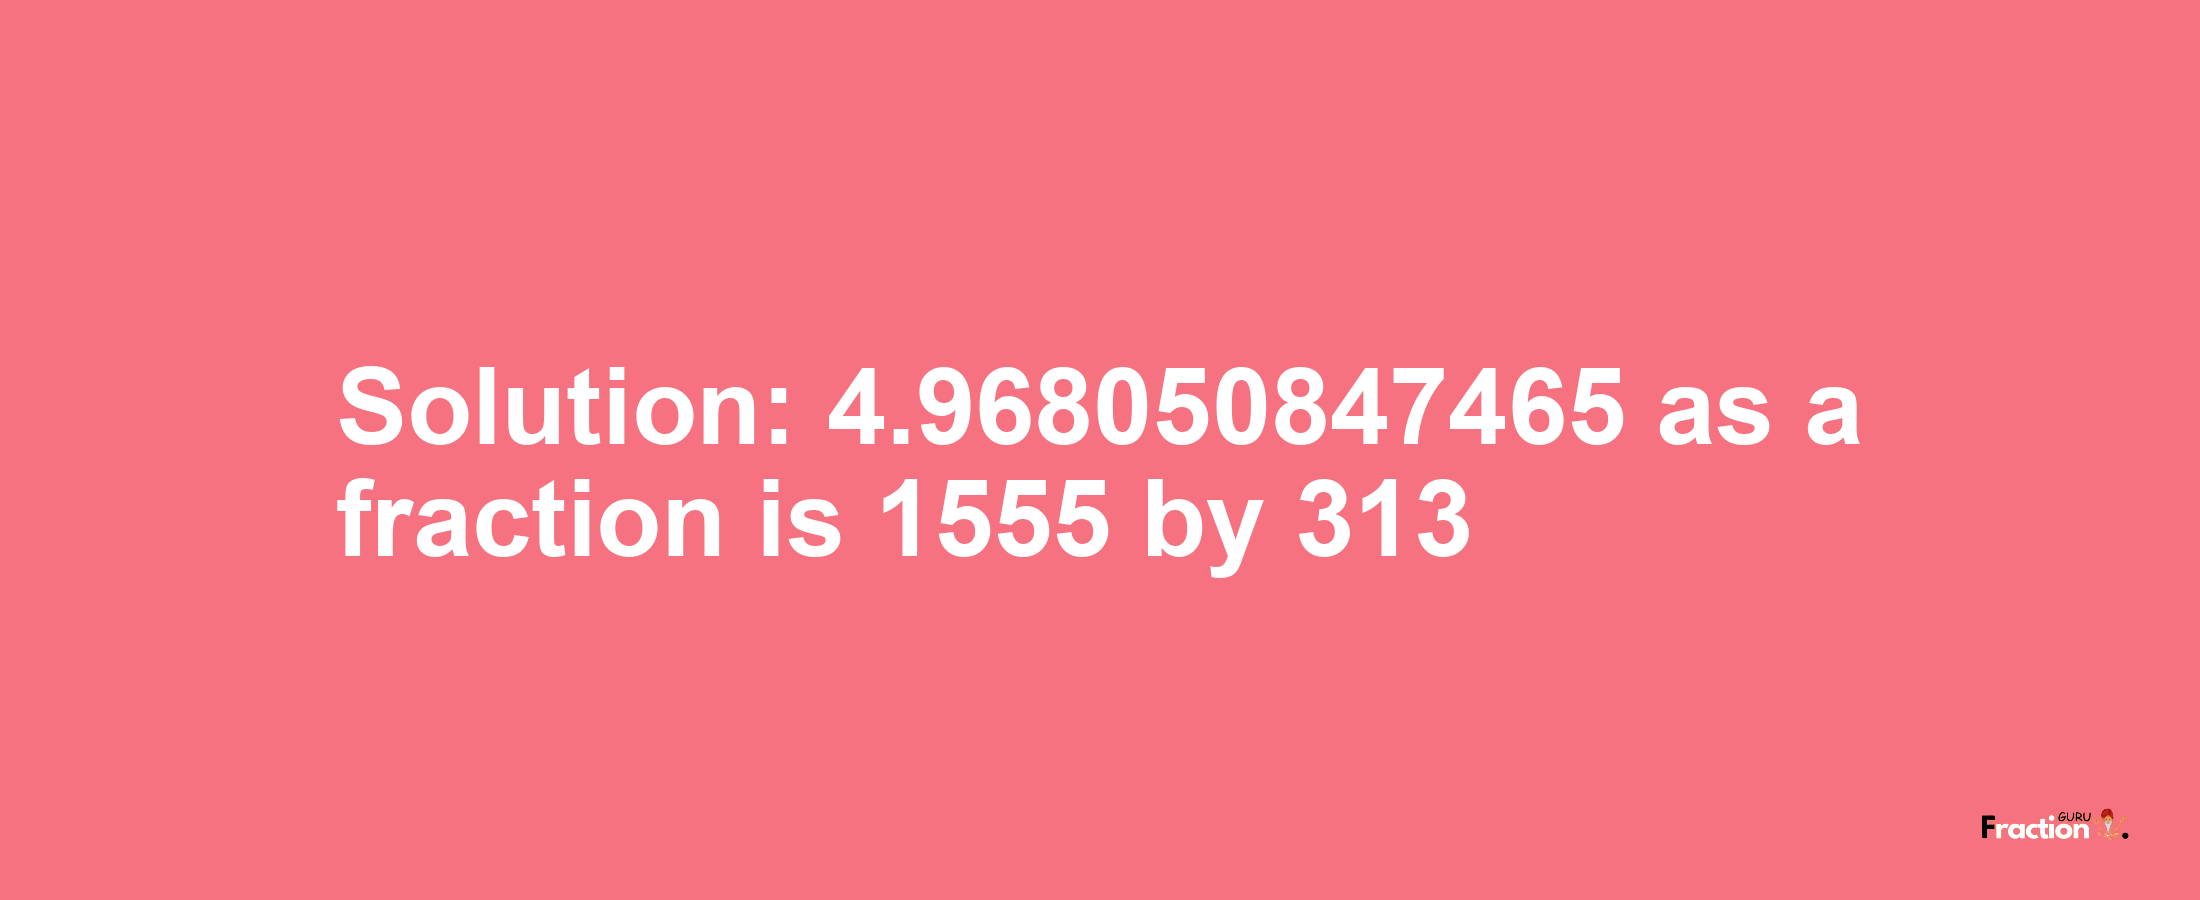 Solution:4.968050847465 as a fraction is 1555/313